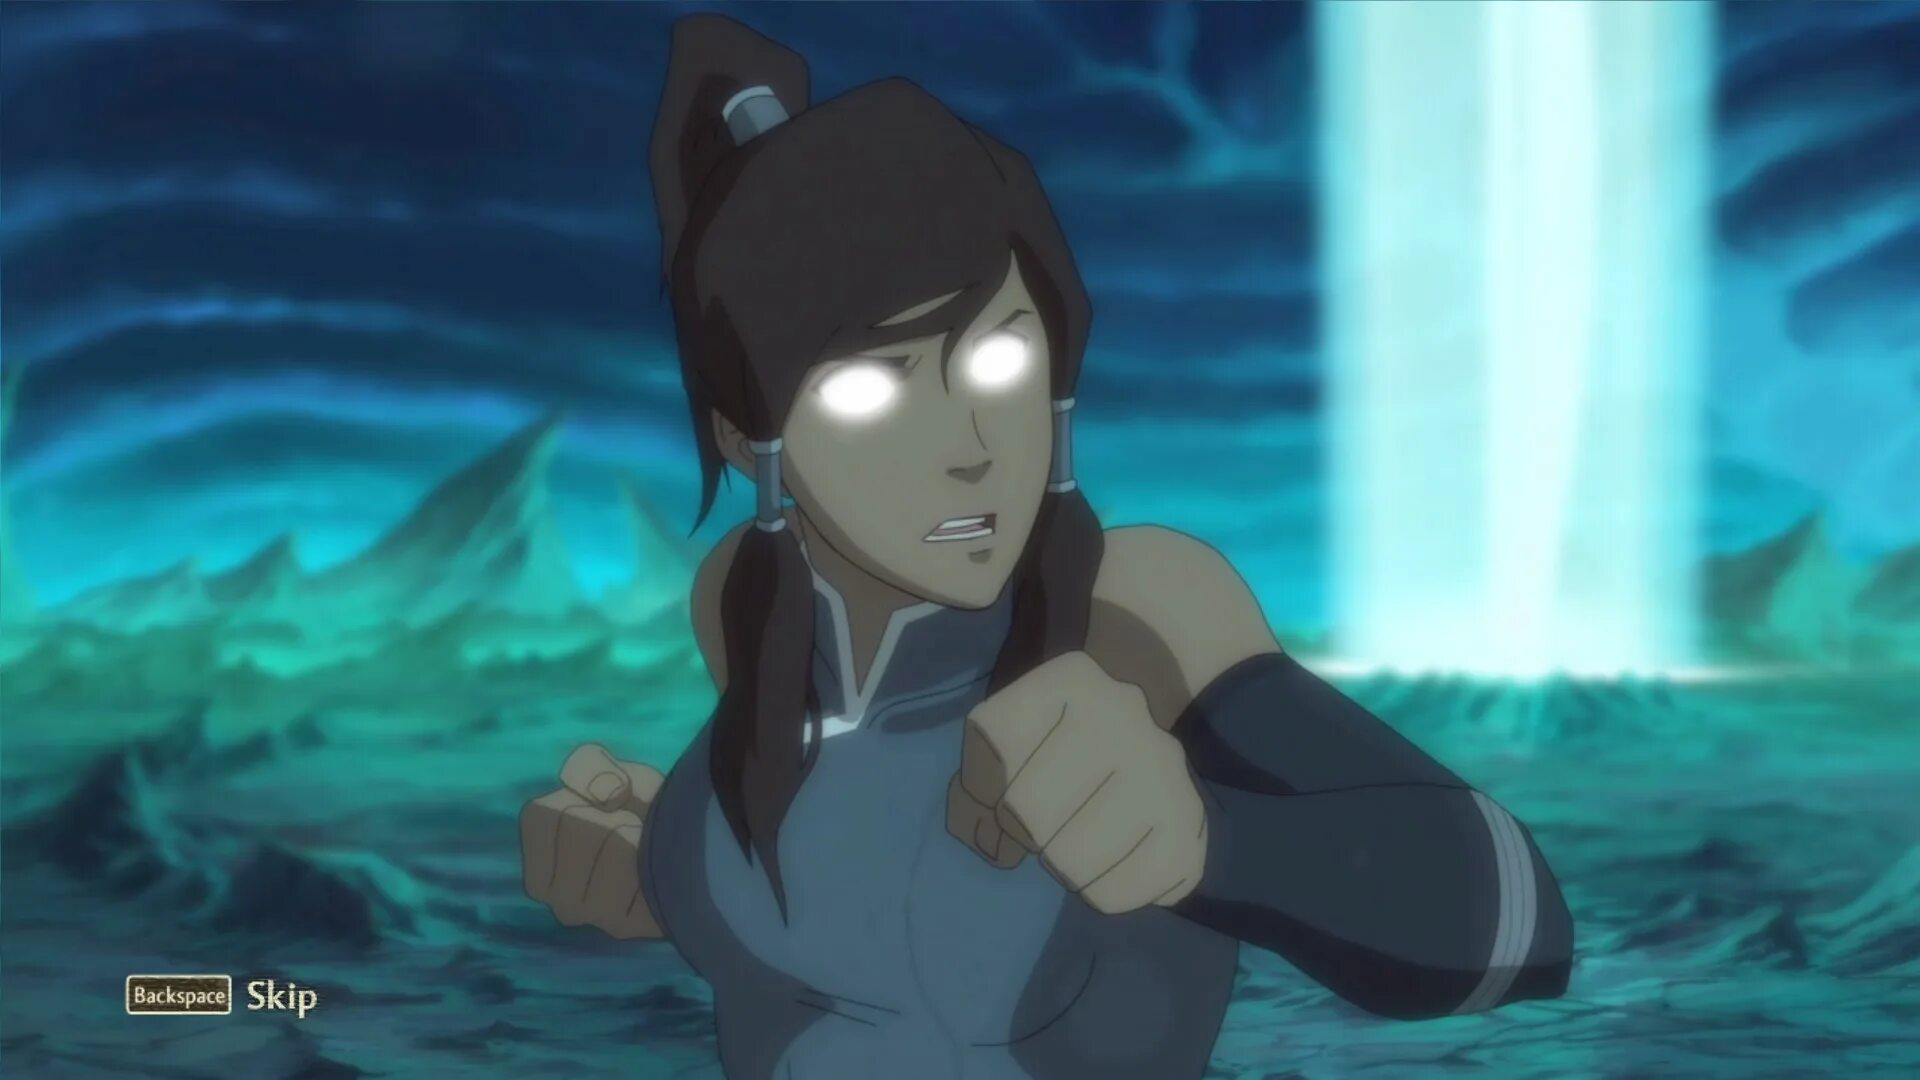 Аватар легенда 6. The Legend of Korra. Аватар корра игра. Корра в состоянии аватара. Avatar: the Legend of Korra Gameplay.